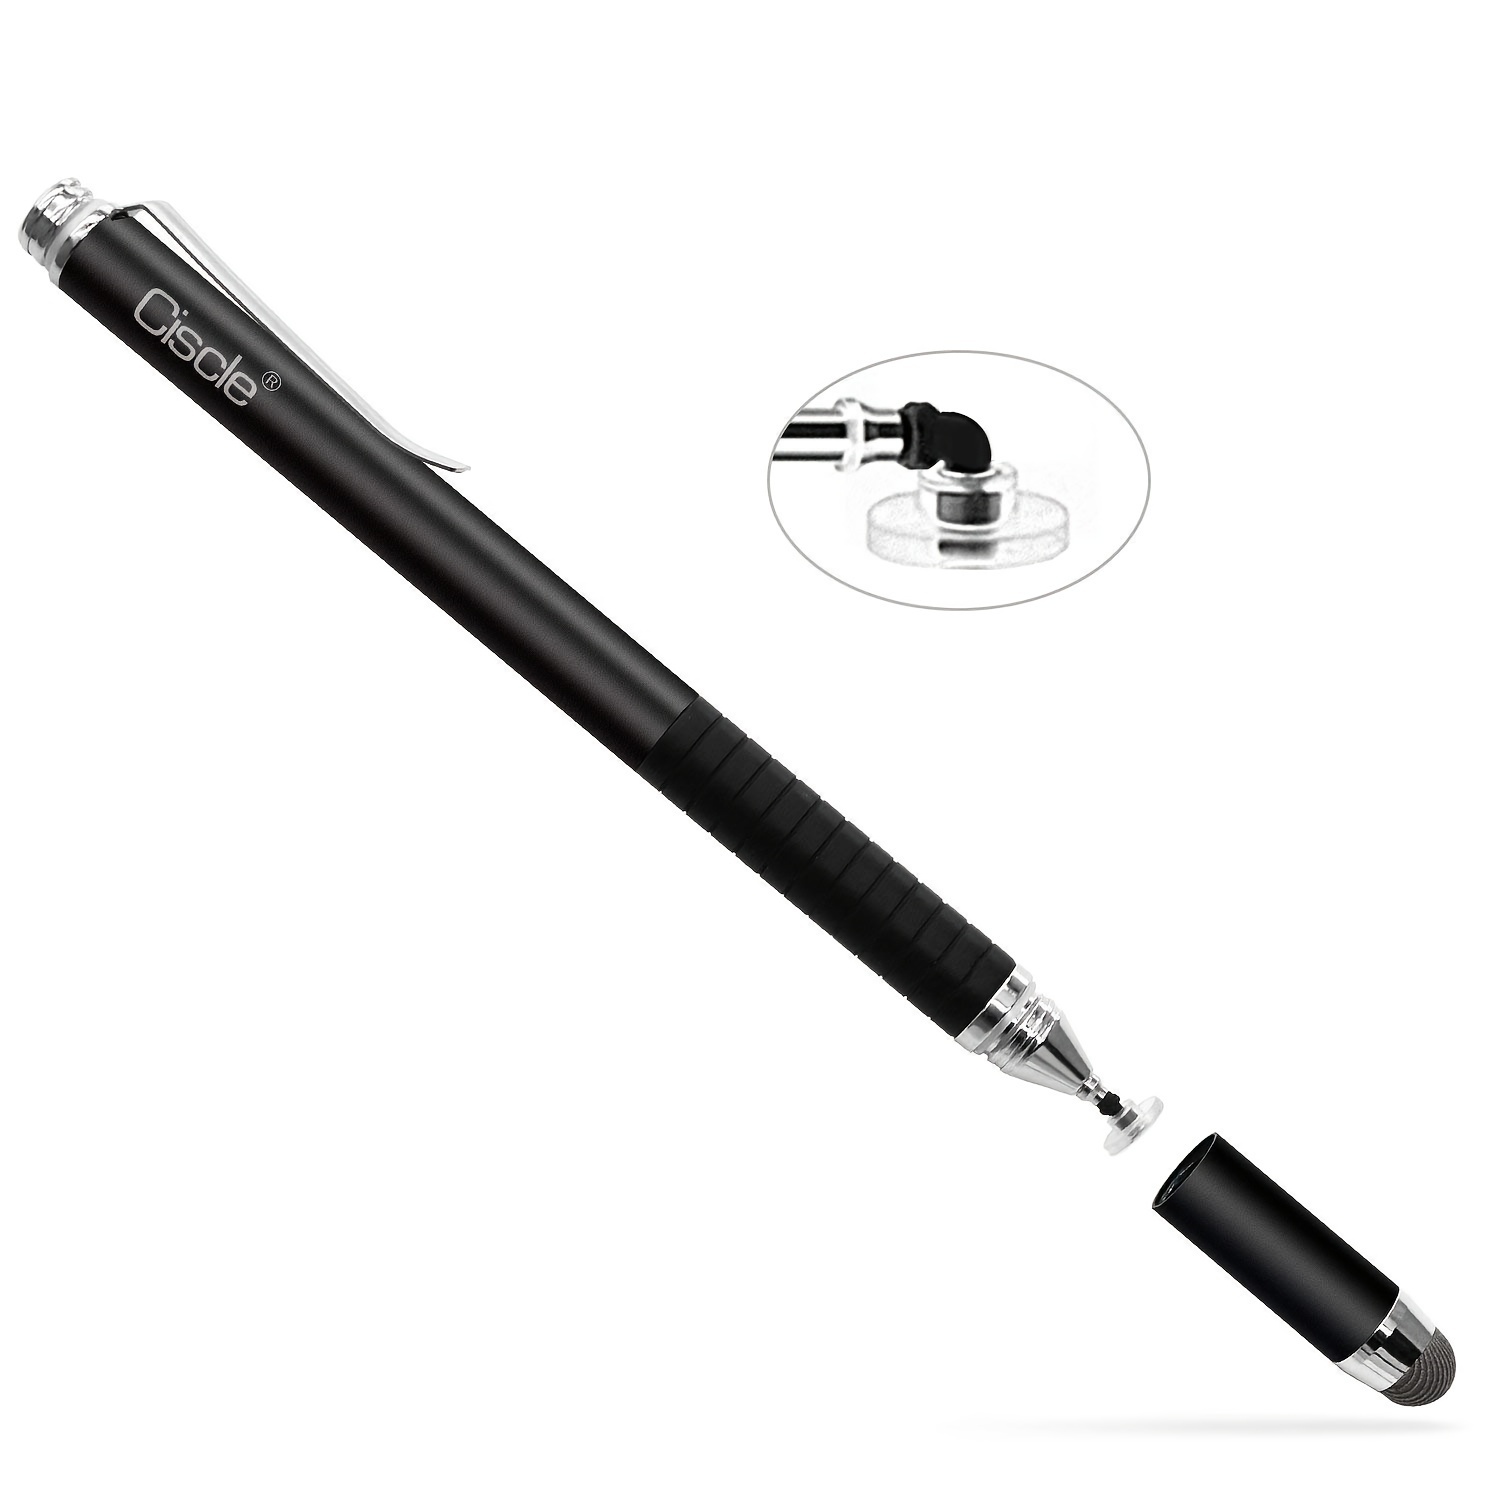 2x 2-in-1 Stylus Pen for Touch Screens - iPad, iPhone, Kindle Fire